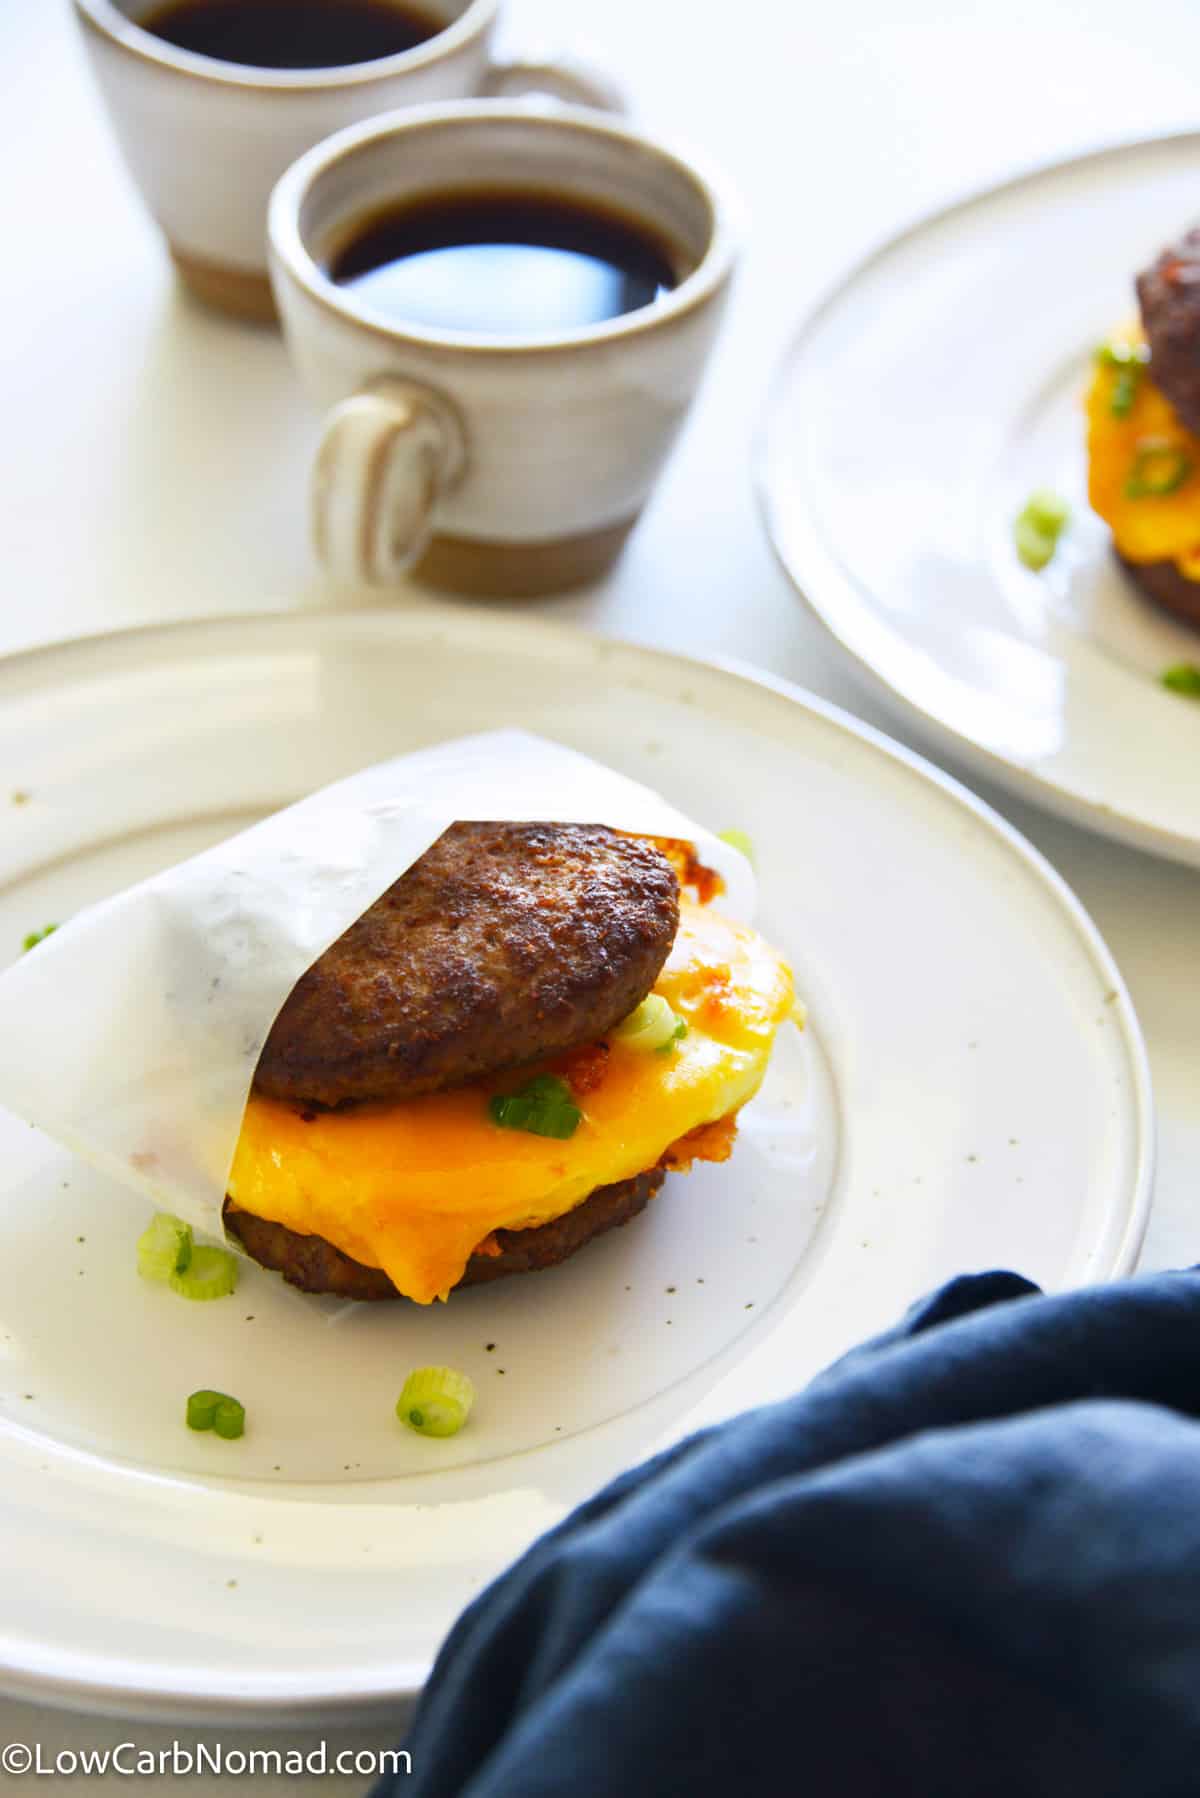 Keto Sausage Egg and Cheese Breakfast Sandwiches on a plate